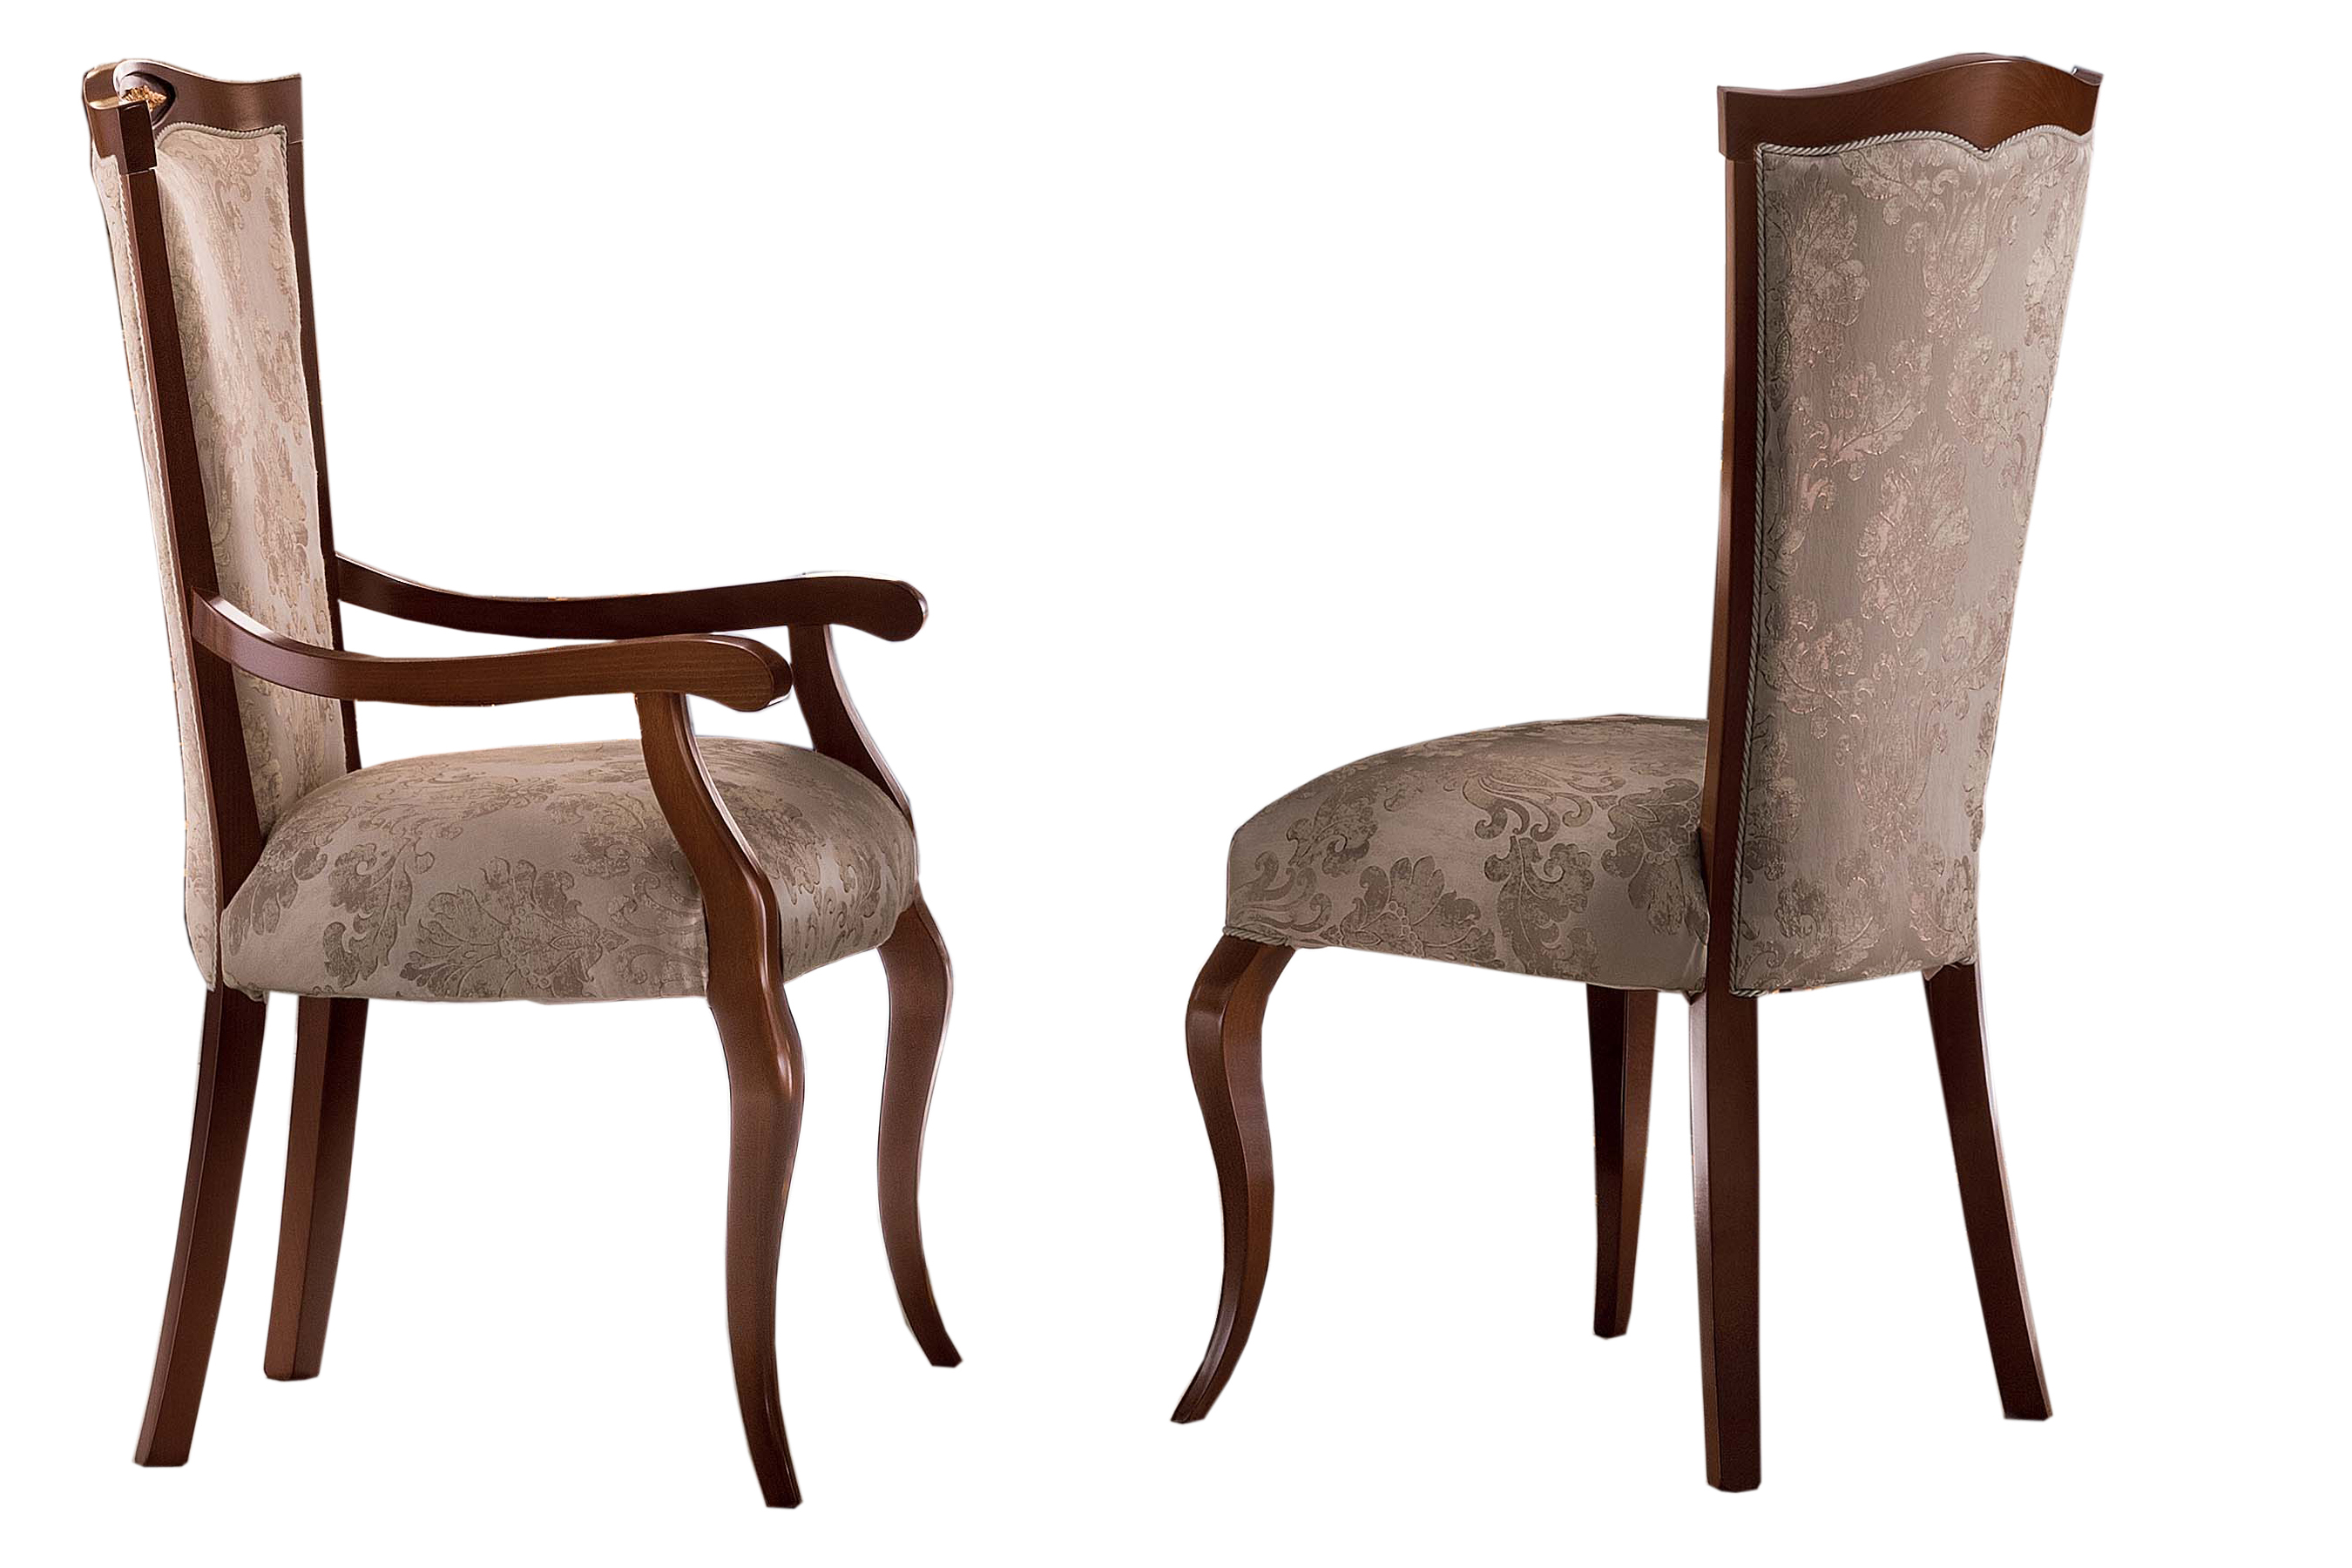 Dining Room Furniture Classic Dining Room Sets Modigliani Chair by Arredoclassic